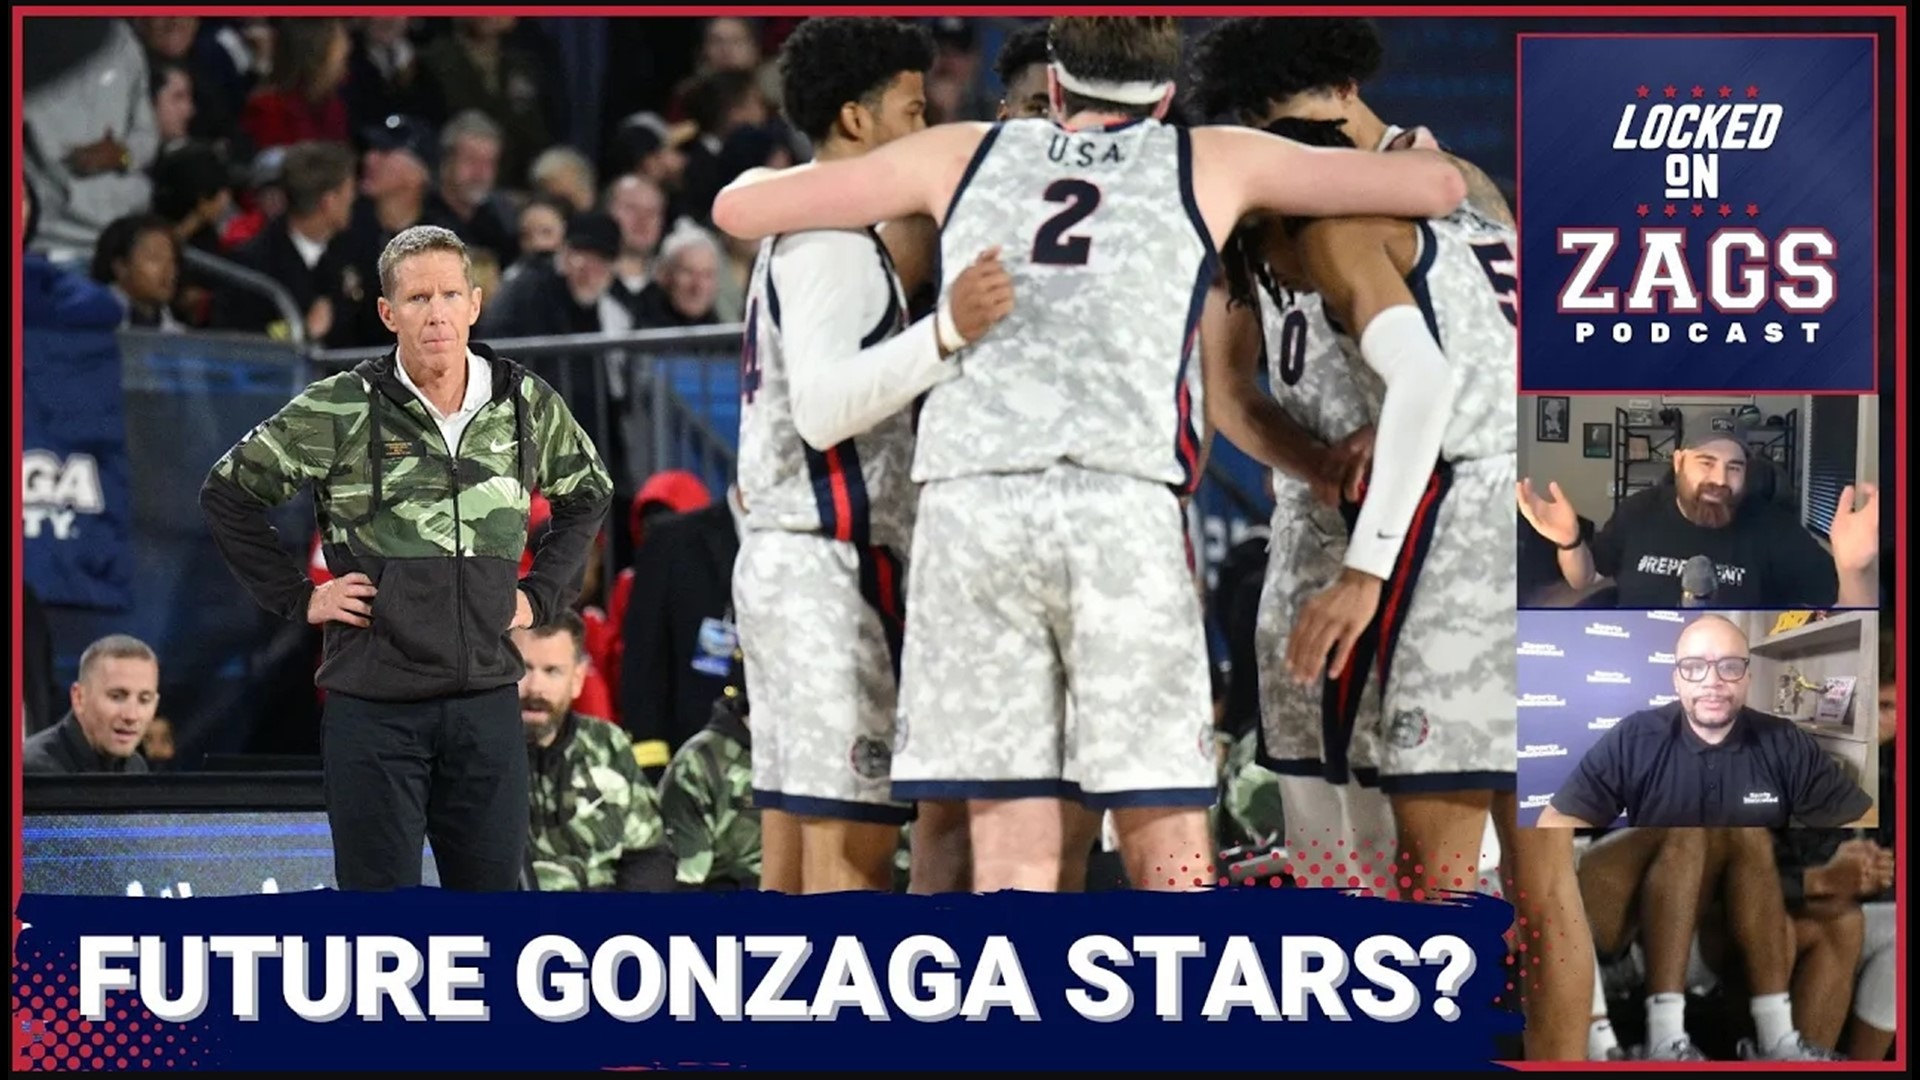 The Gonzaga Bulldogs landed a prized recruit in the class of 2023, Alex Toohey. Alongside Dusty Stromer, Gonzaga has two big pieces next season.